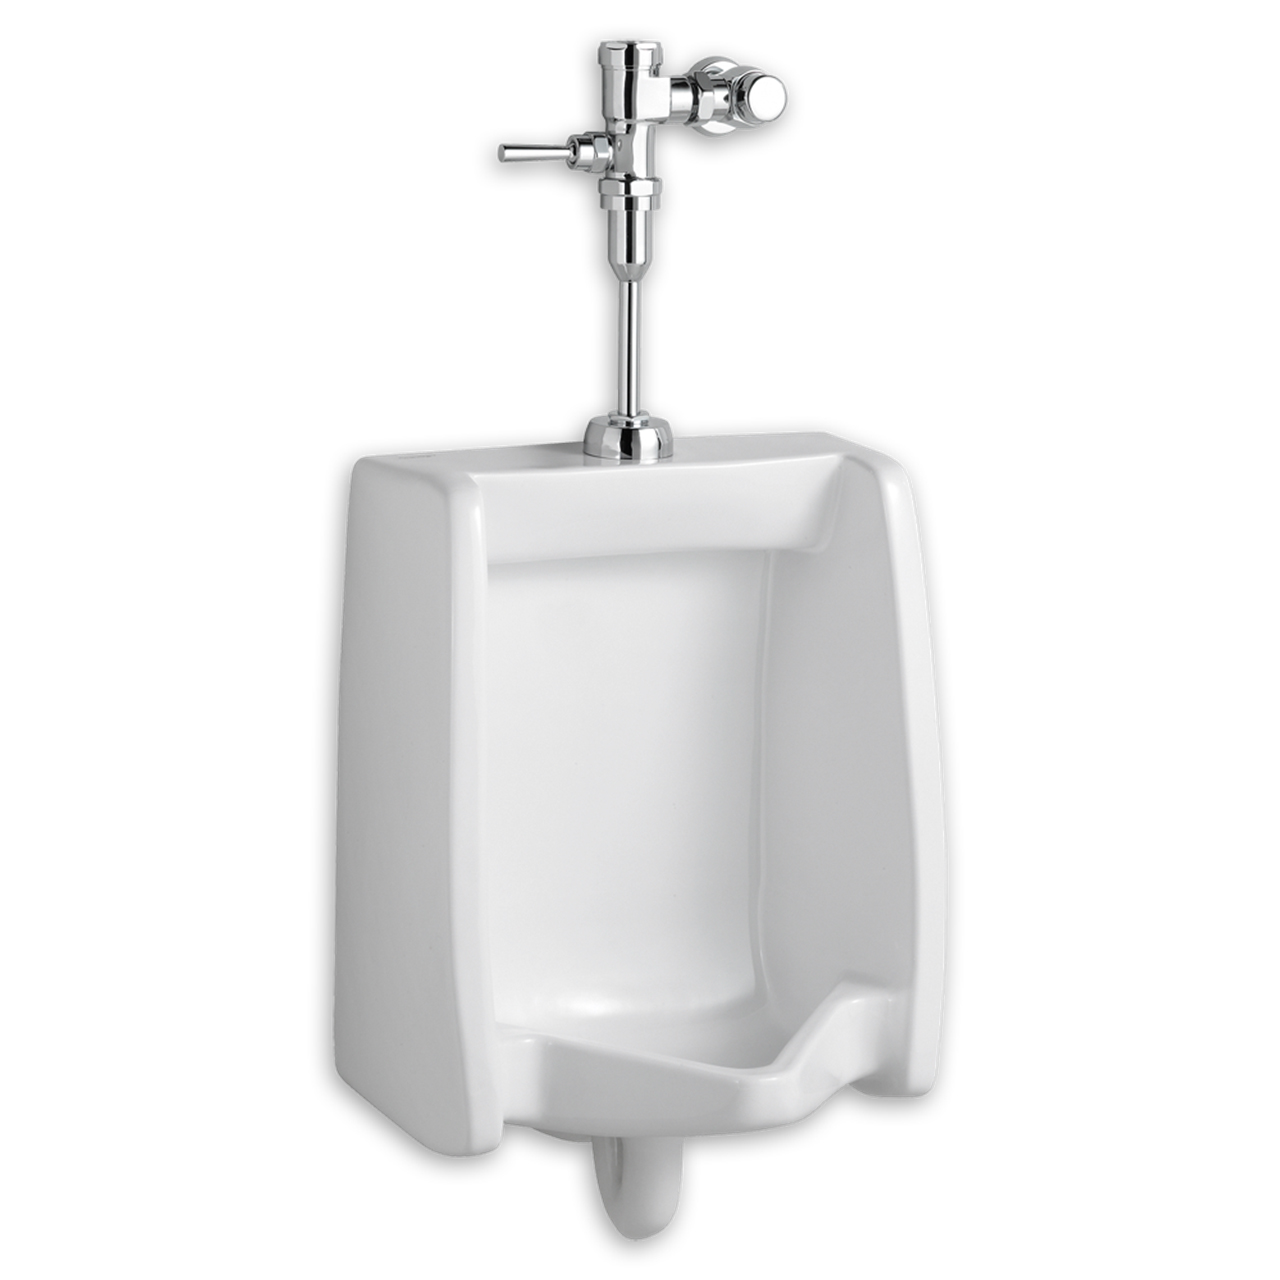 Washbrook FloWise High Efficiency Urinal in White 0.5 gpf